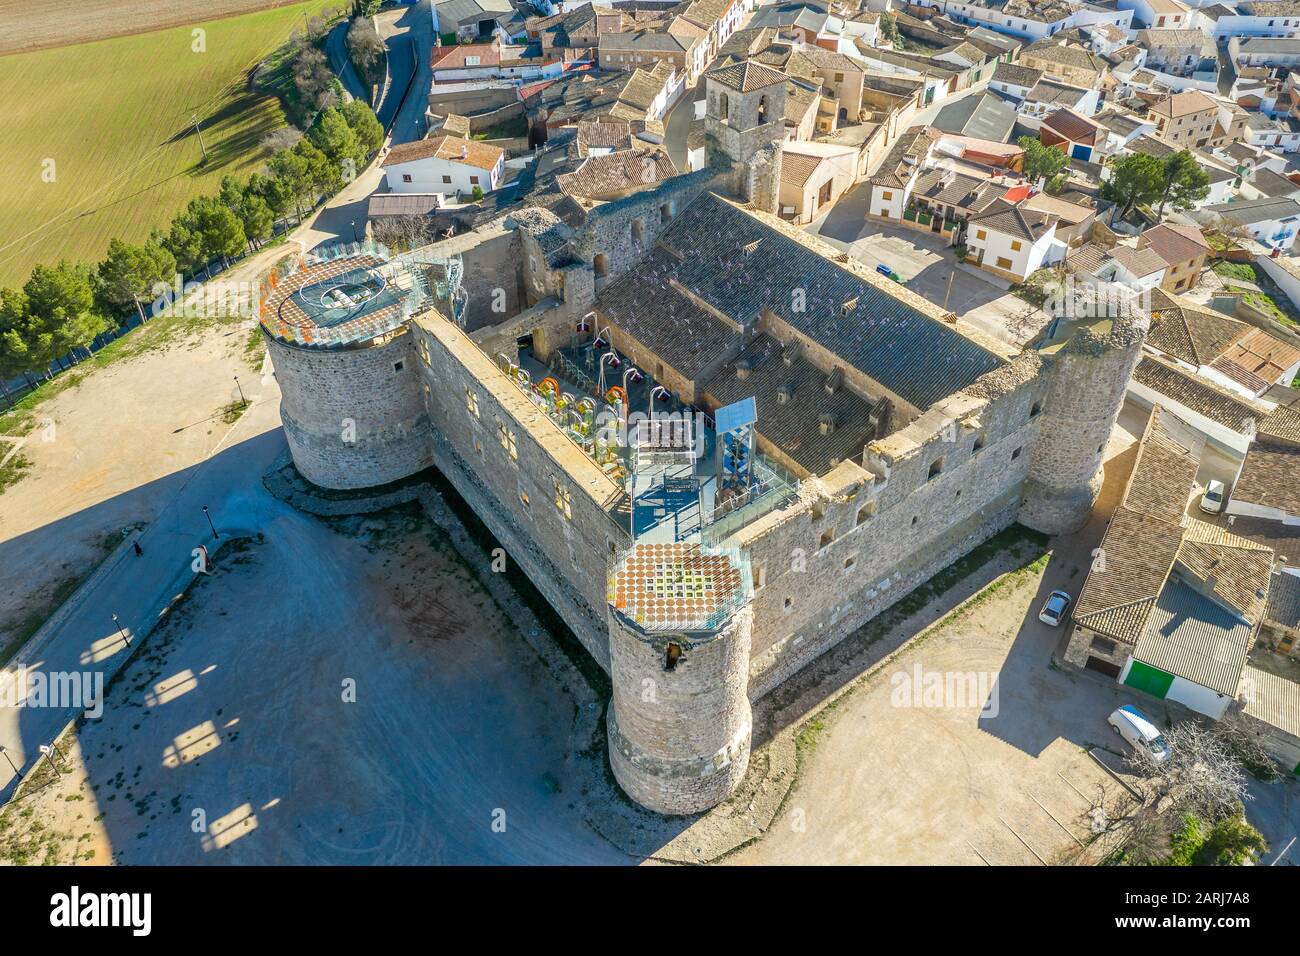 Aerial view of Garcimunoz medieval castle church where ancient architecture meets modern in Spain Stock Photo